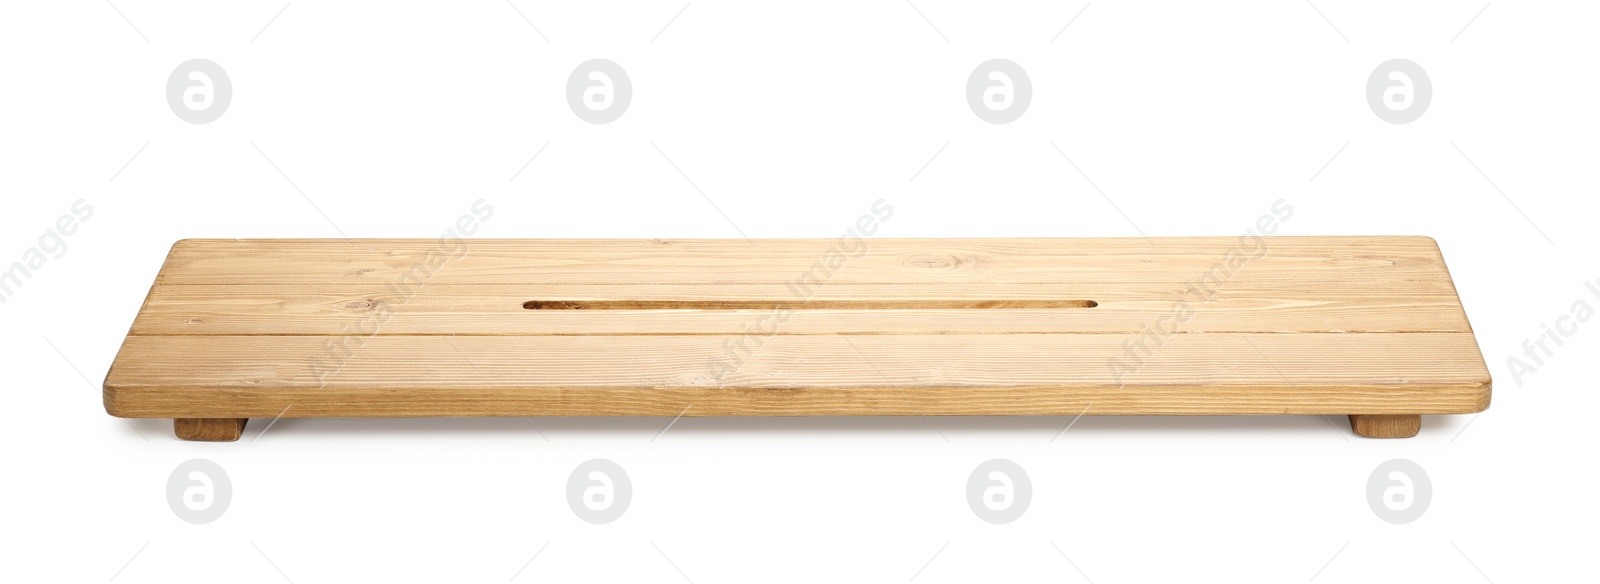 Photo of One wooden bathroom tray on white background